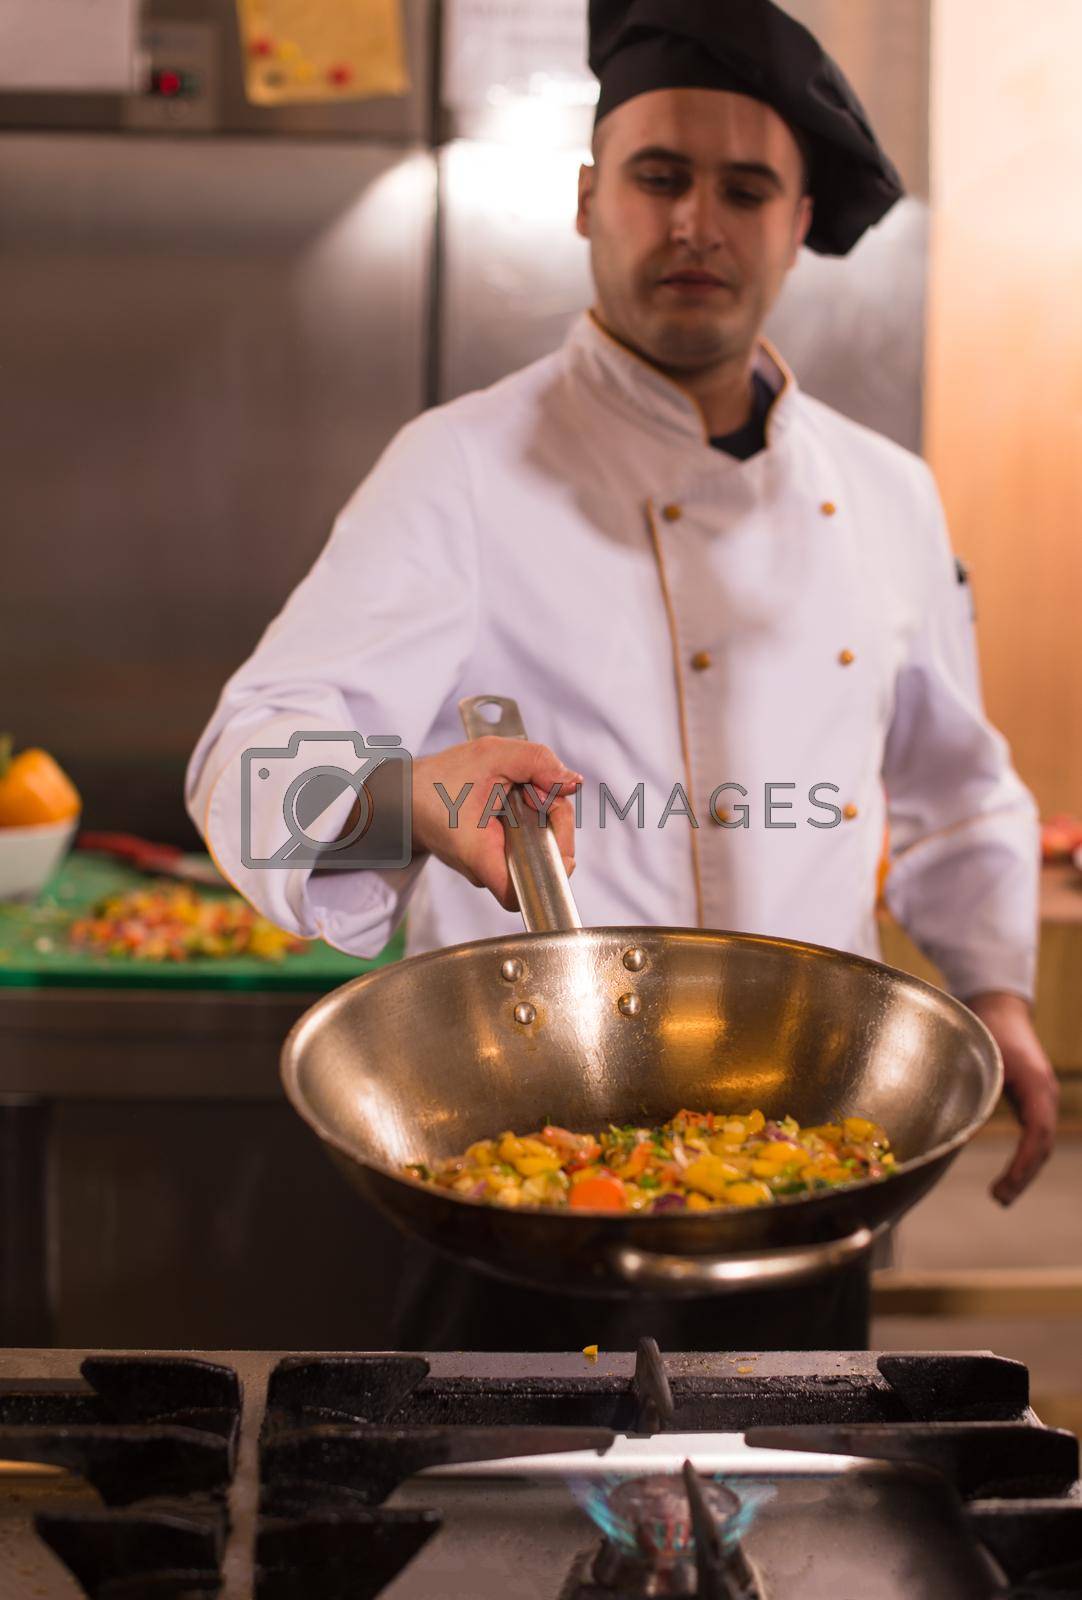 Royalty free image of chef flipping vegetables in wok by dotshock